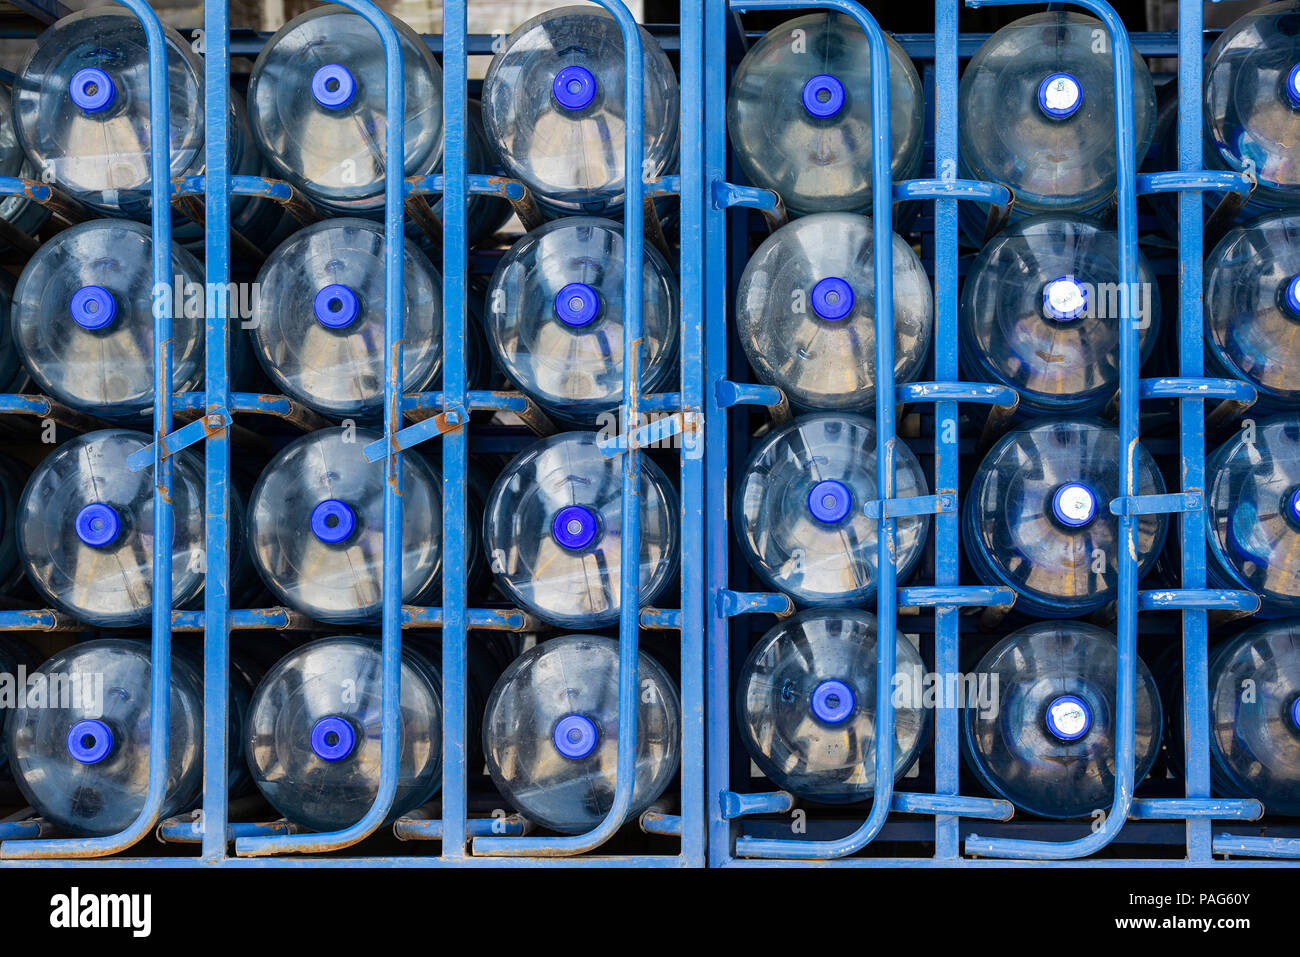 Rows of water bottles arranged in warehouse Stock Photo